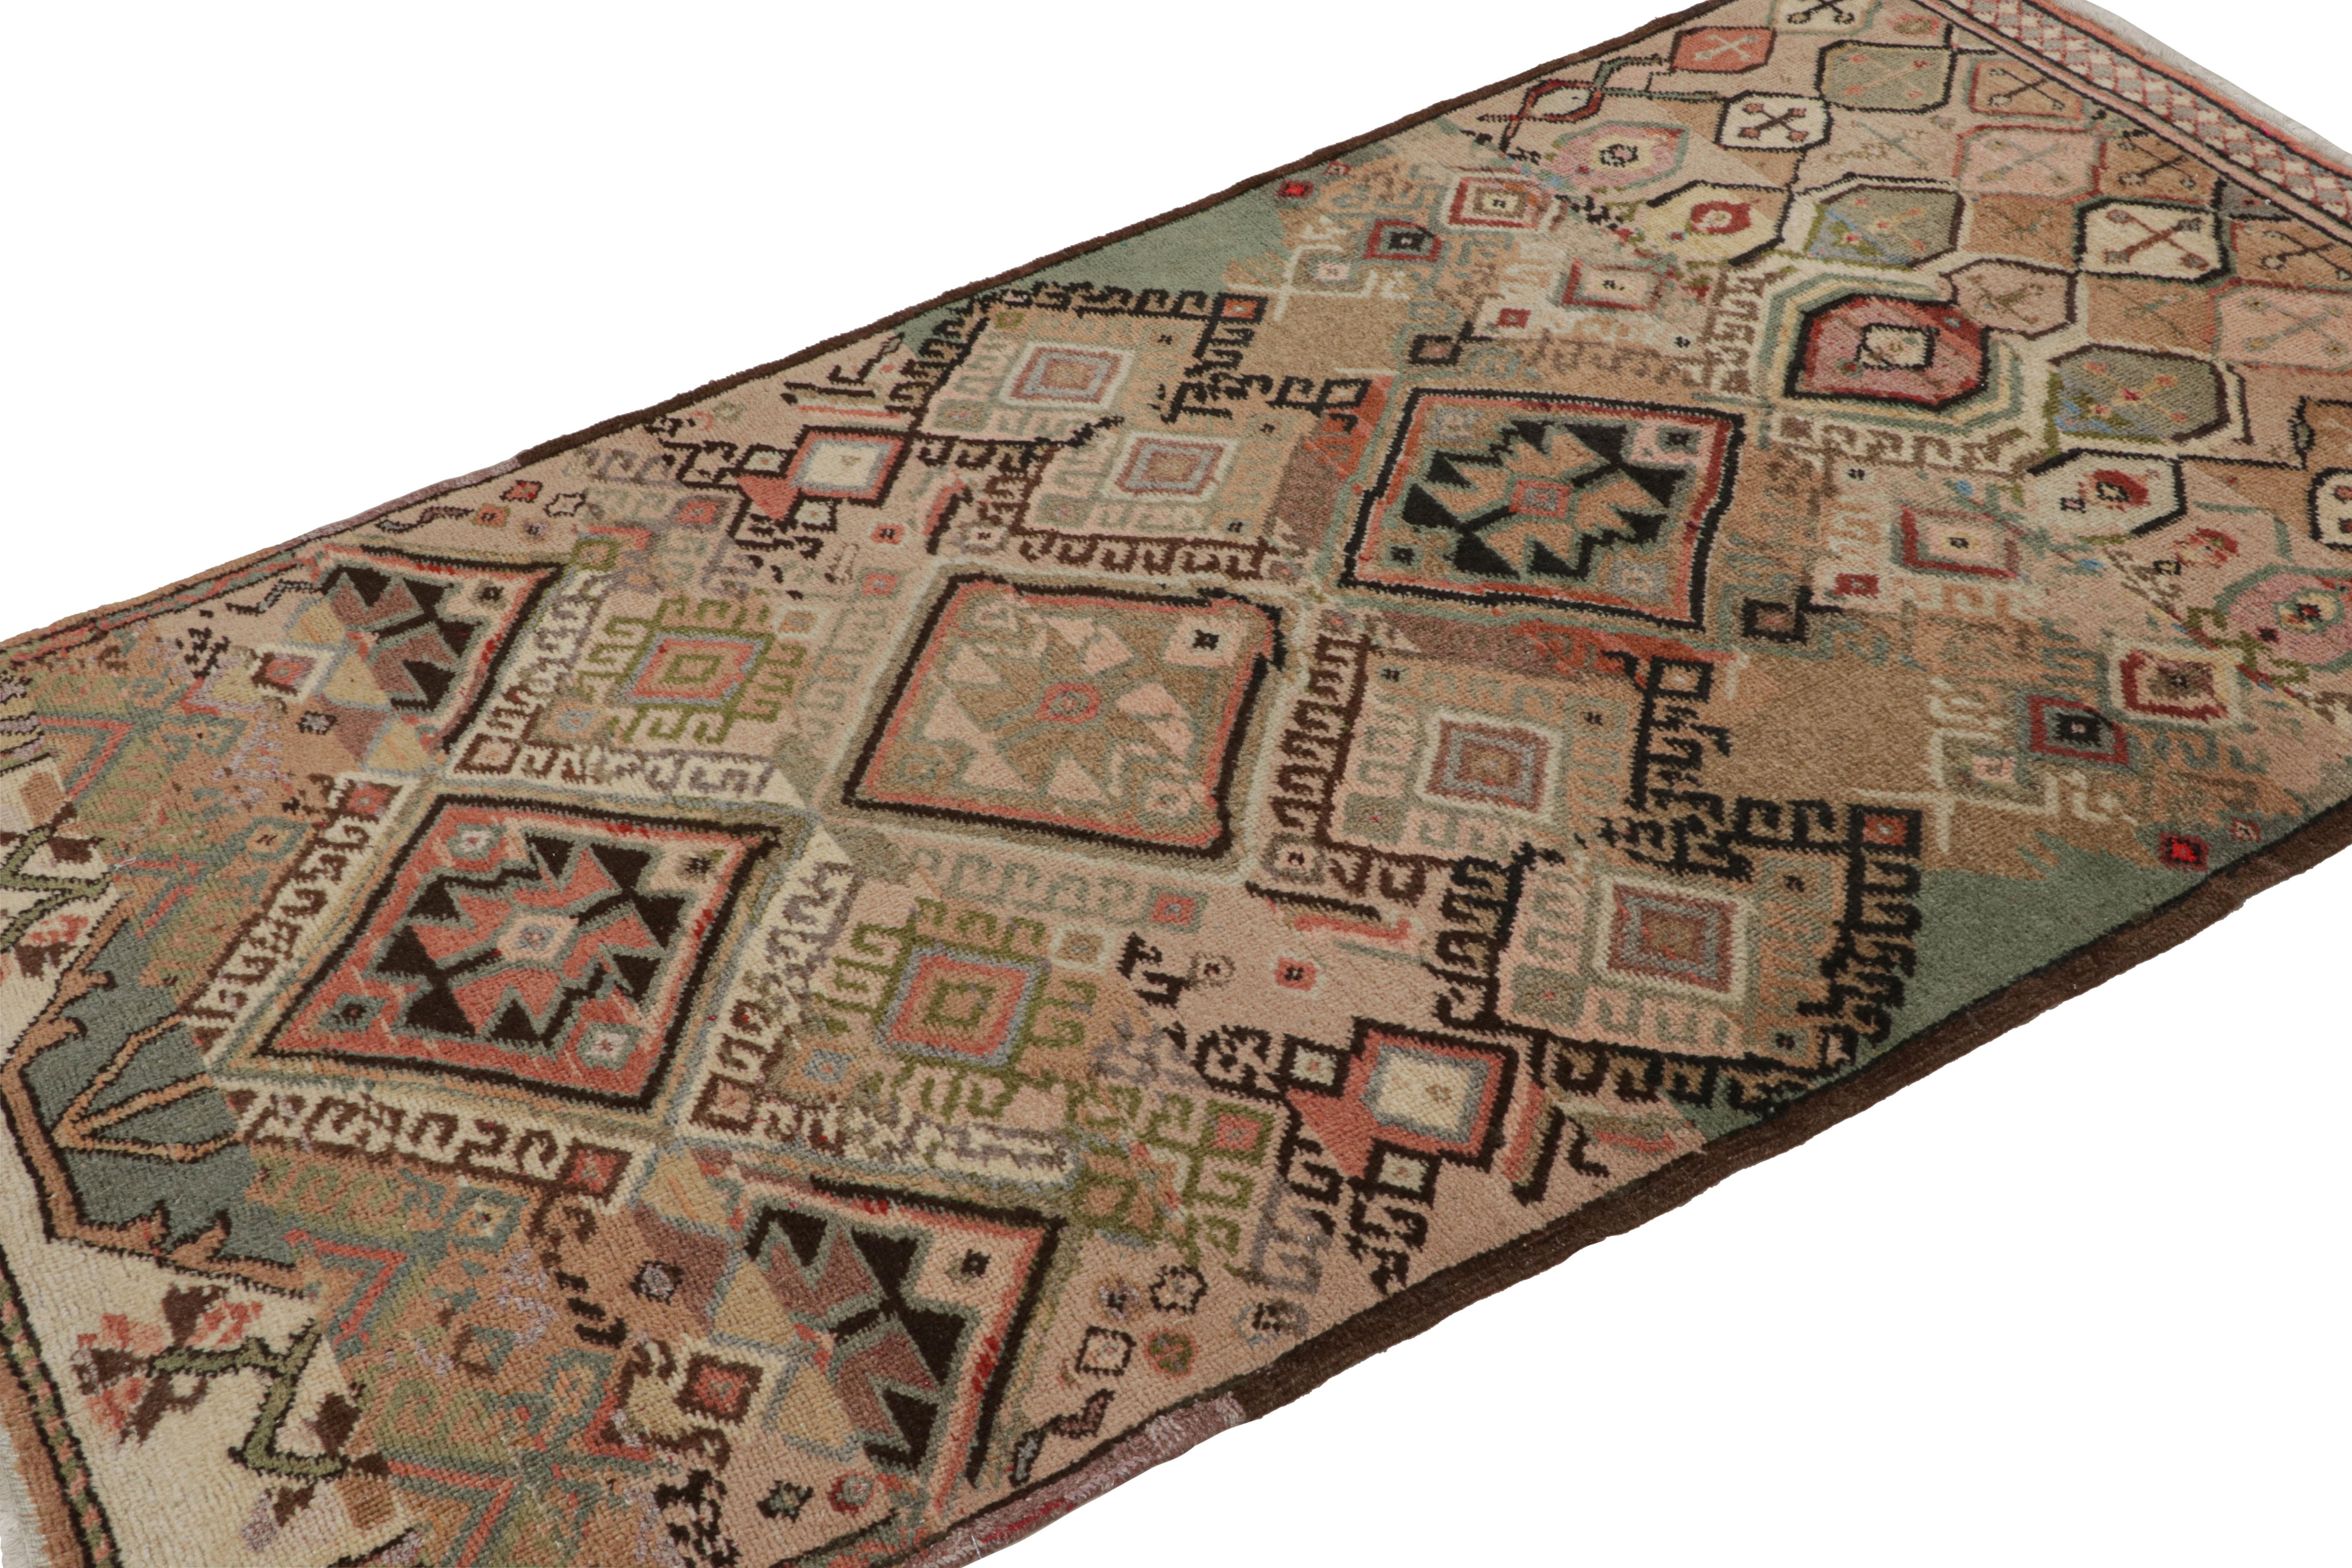 From Rug & Kilim’s Mid-Century Pasha collection, a 4x7 vintage runner rug believed to be among the works of a bold multidisciplinary designer from Turkey. 

On the Design: 

This special rug features geometric patterns, traditional motifs & latch